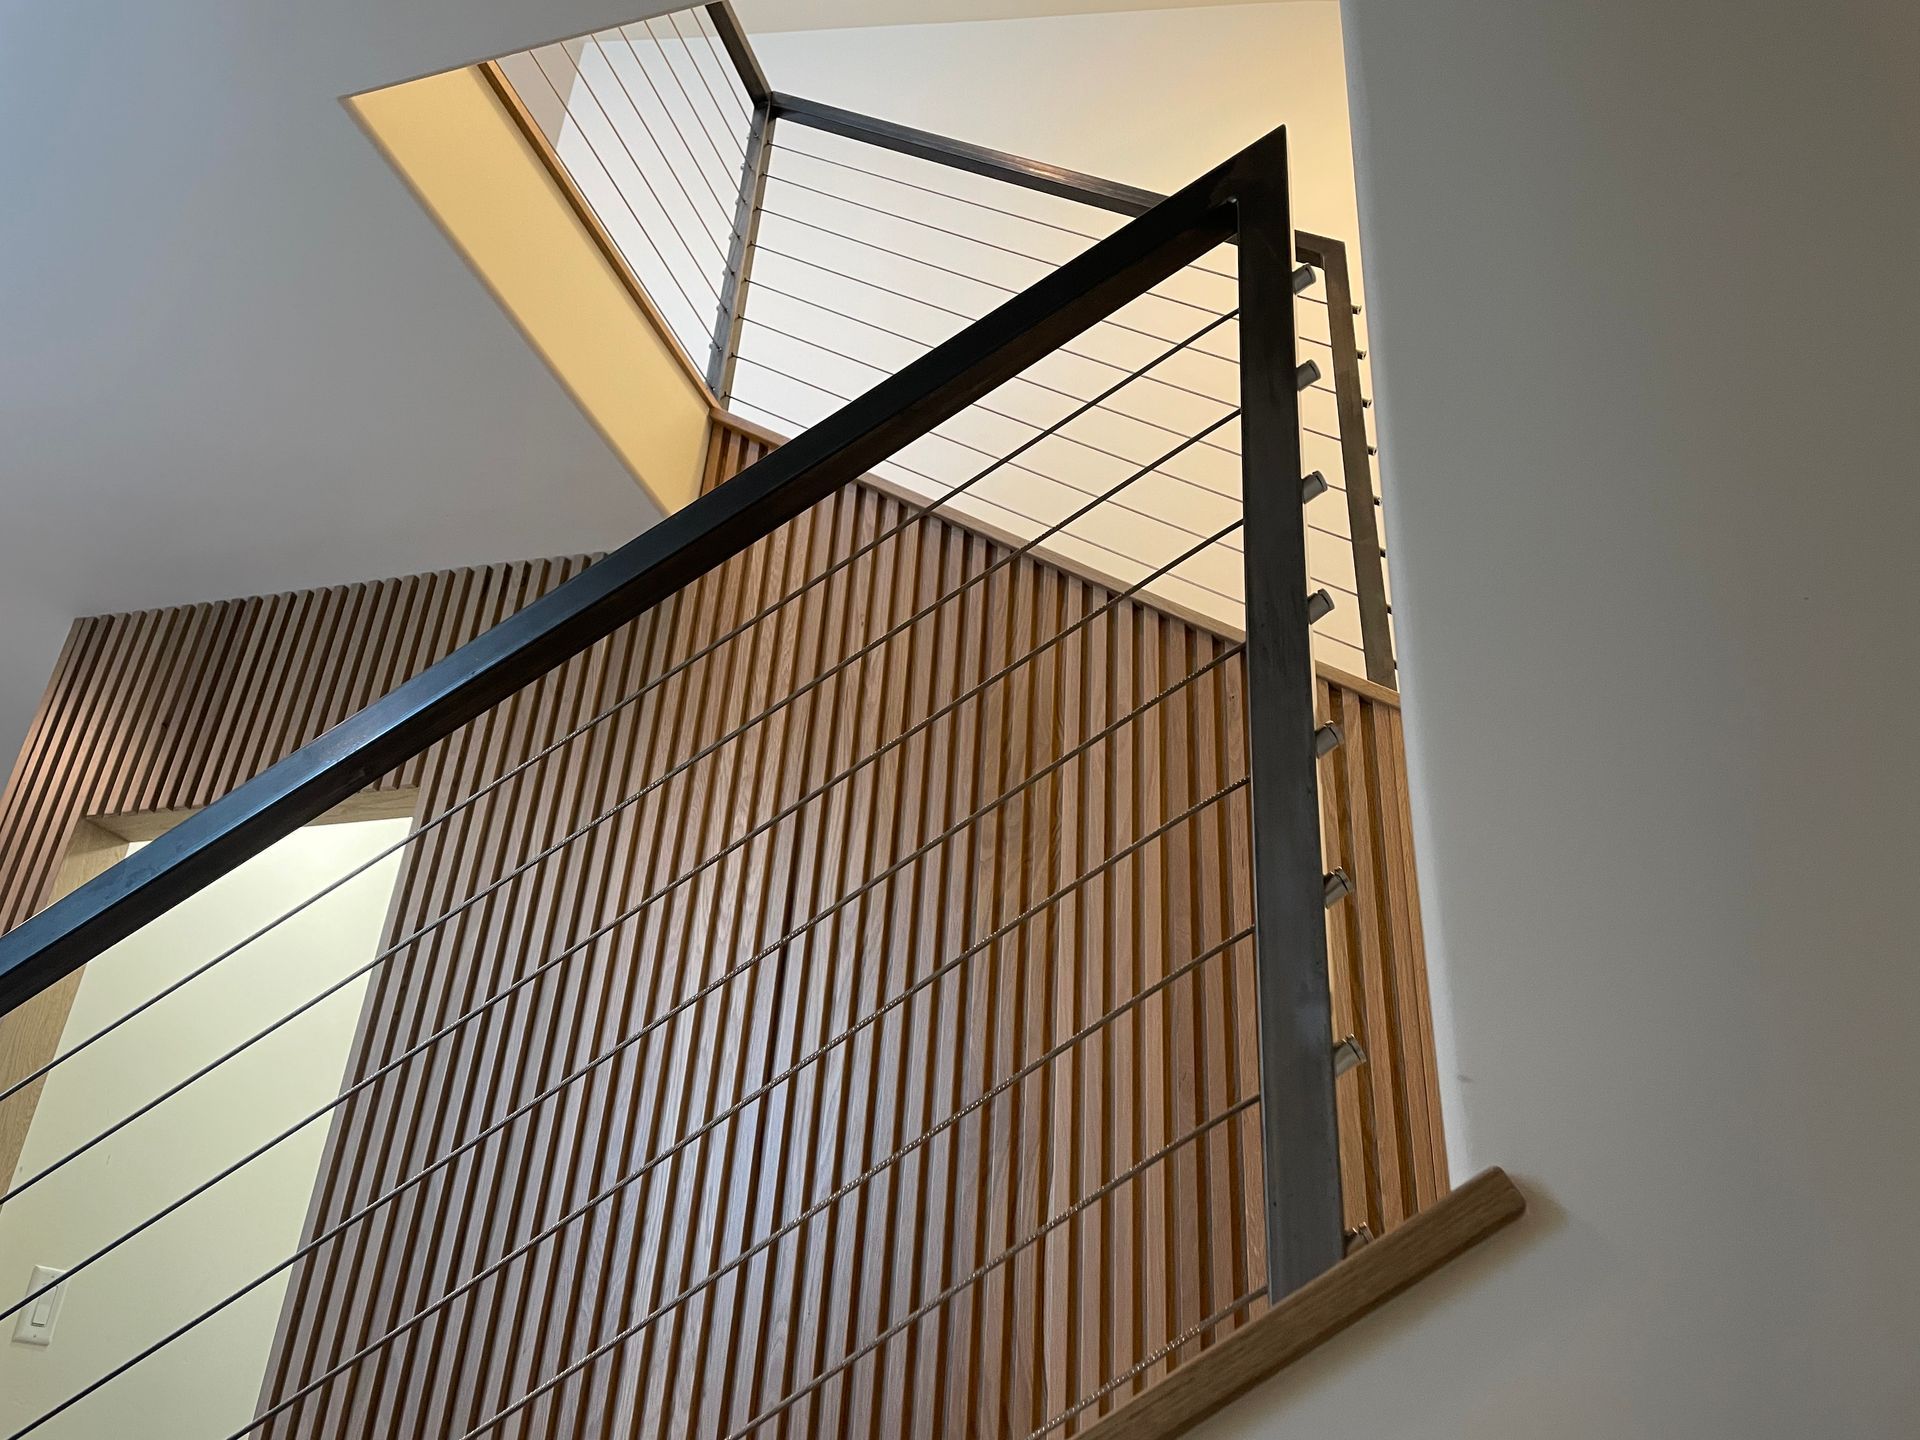 Looking up at a staircase with a wooden railing